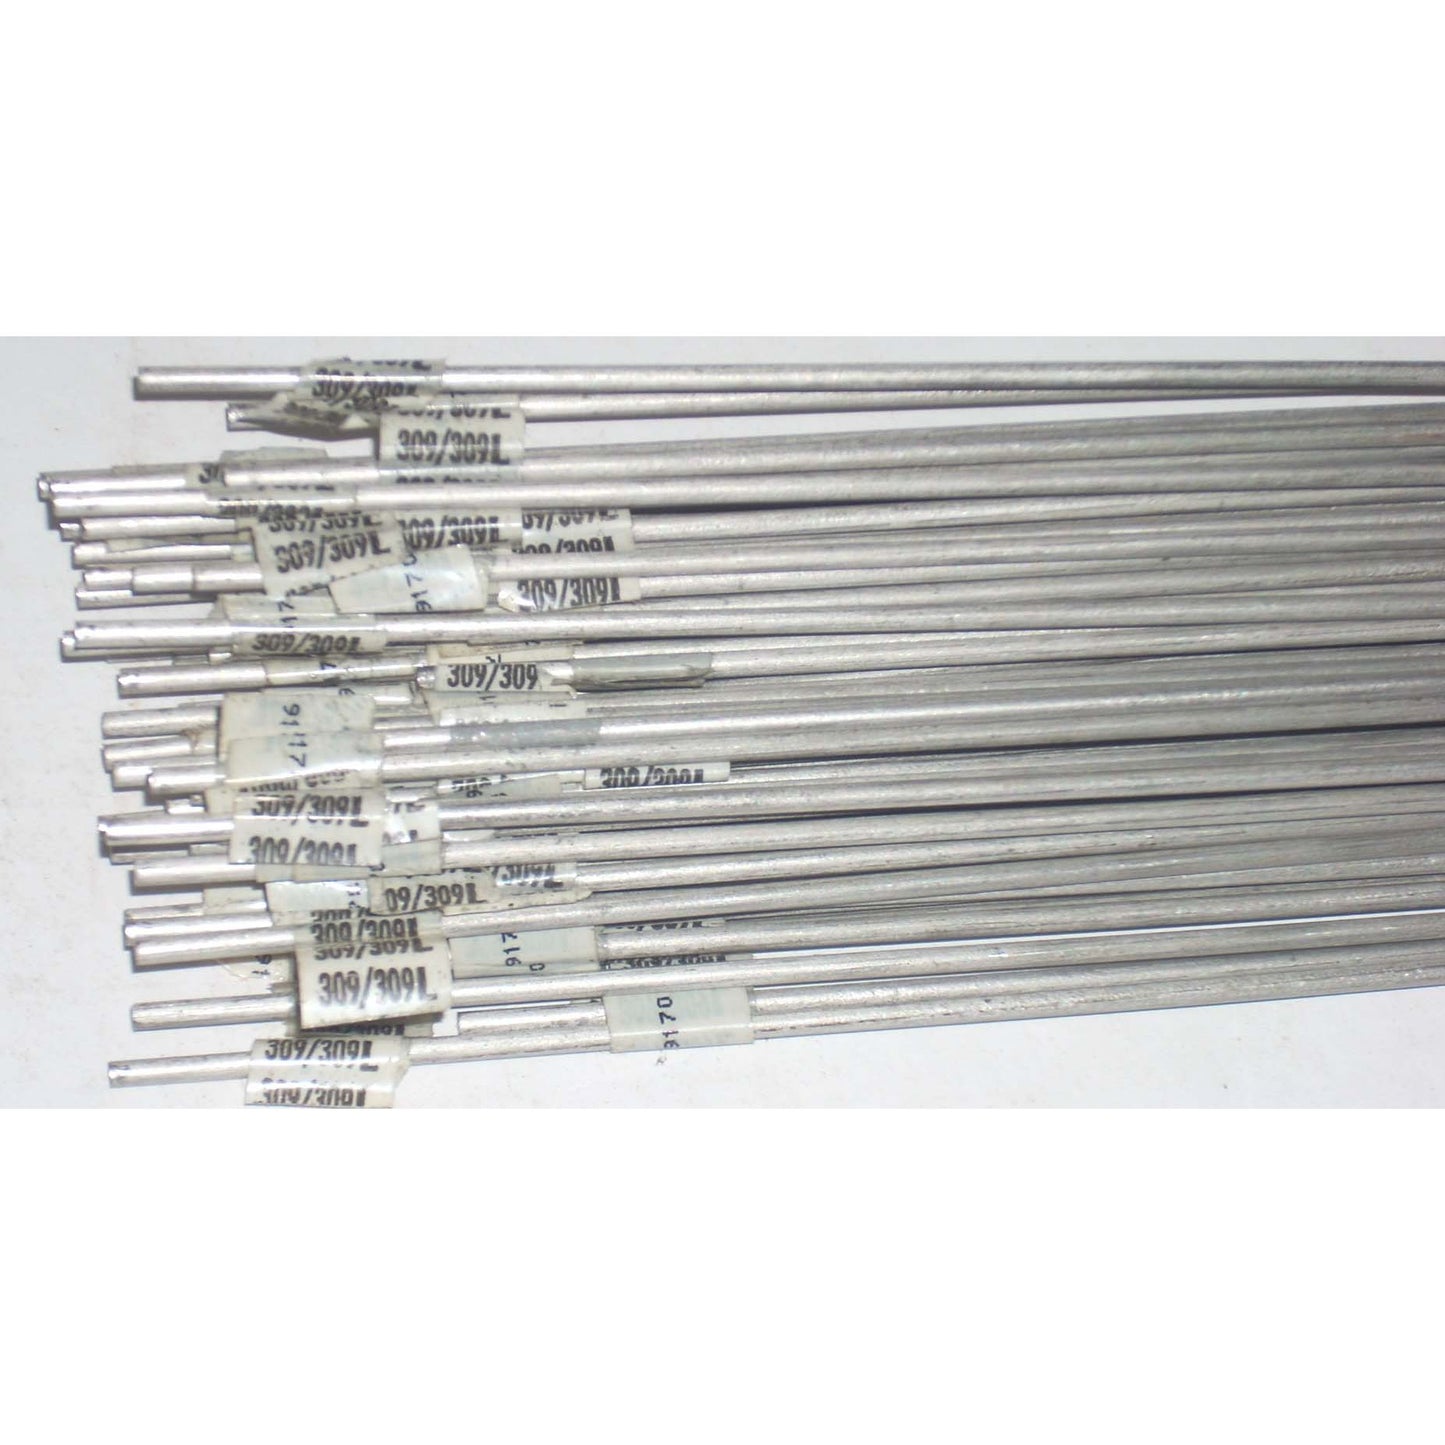 Arcos 309/309L Stainless Steel Tig Welding Rods 3/32 x 36" 4.59 lbs